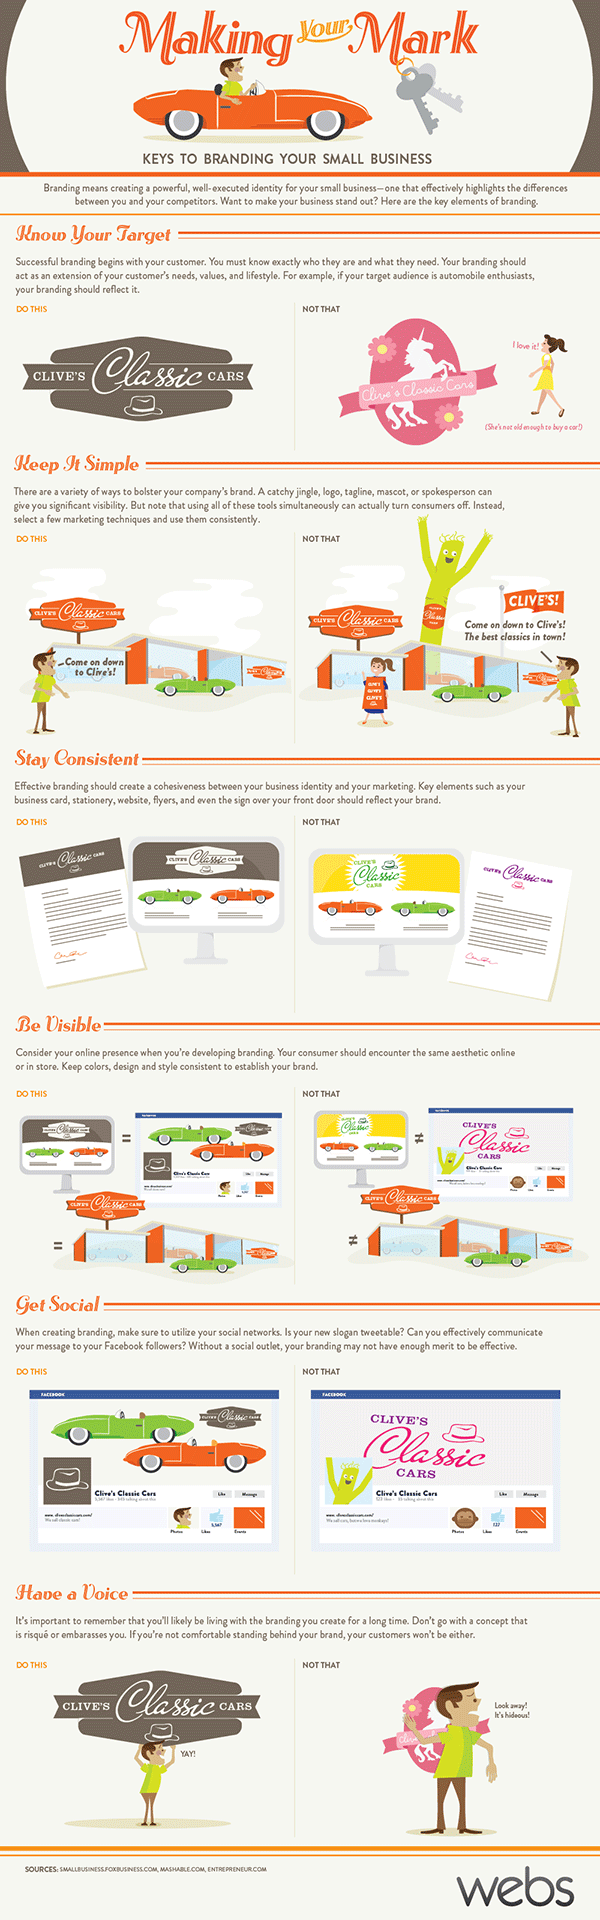 simple-guide-to-branding-infographic